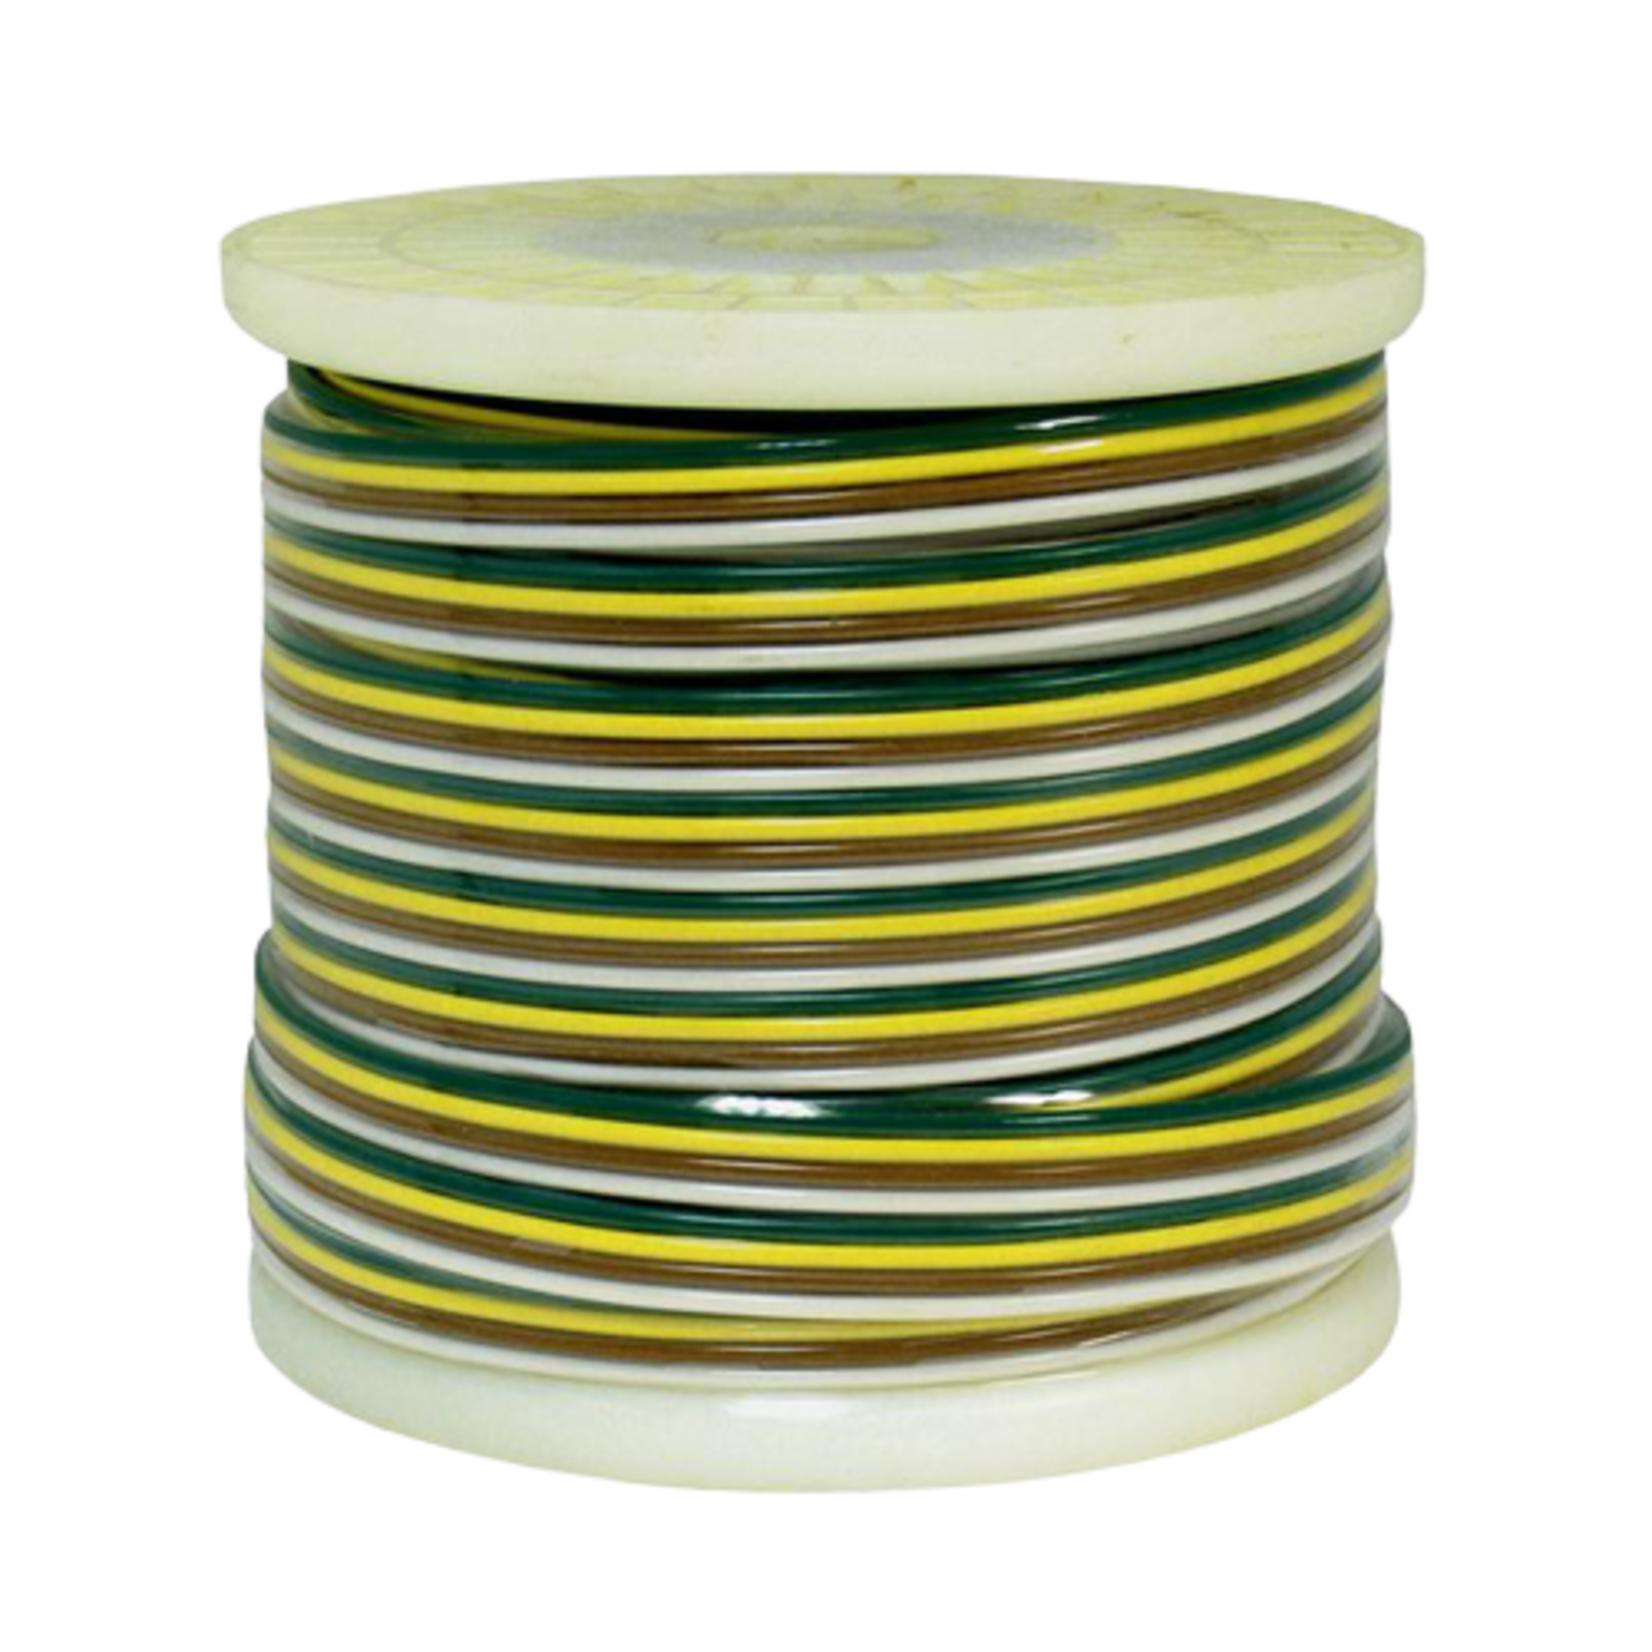 4 CONDUCTORS WIRE ROLL 100 FEET